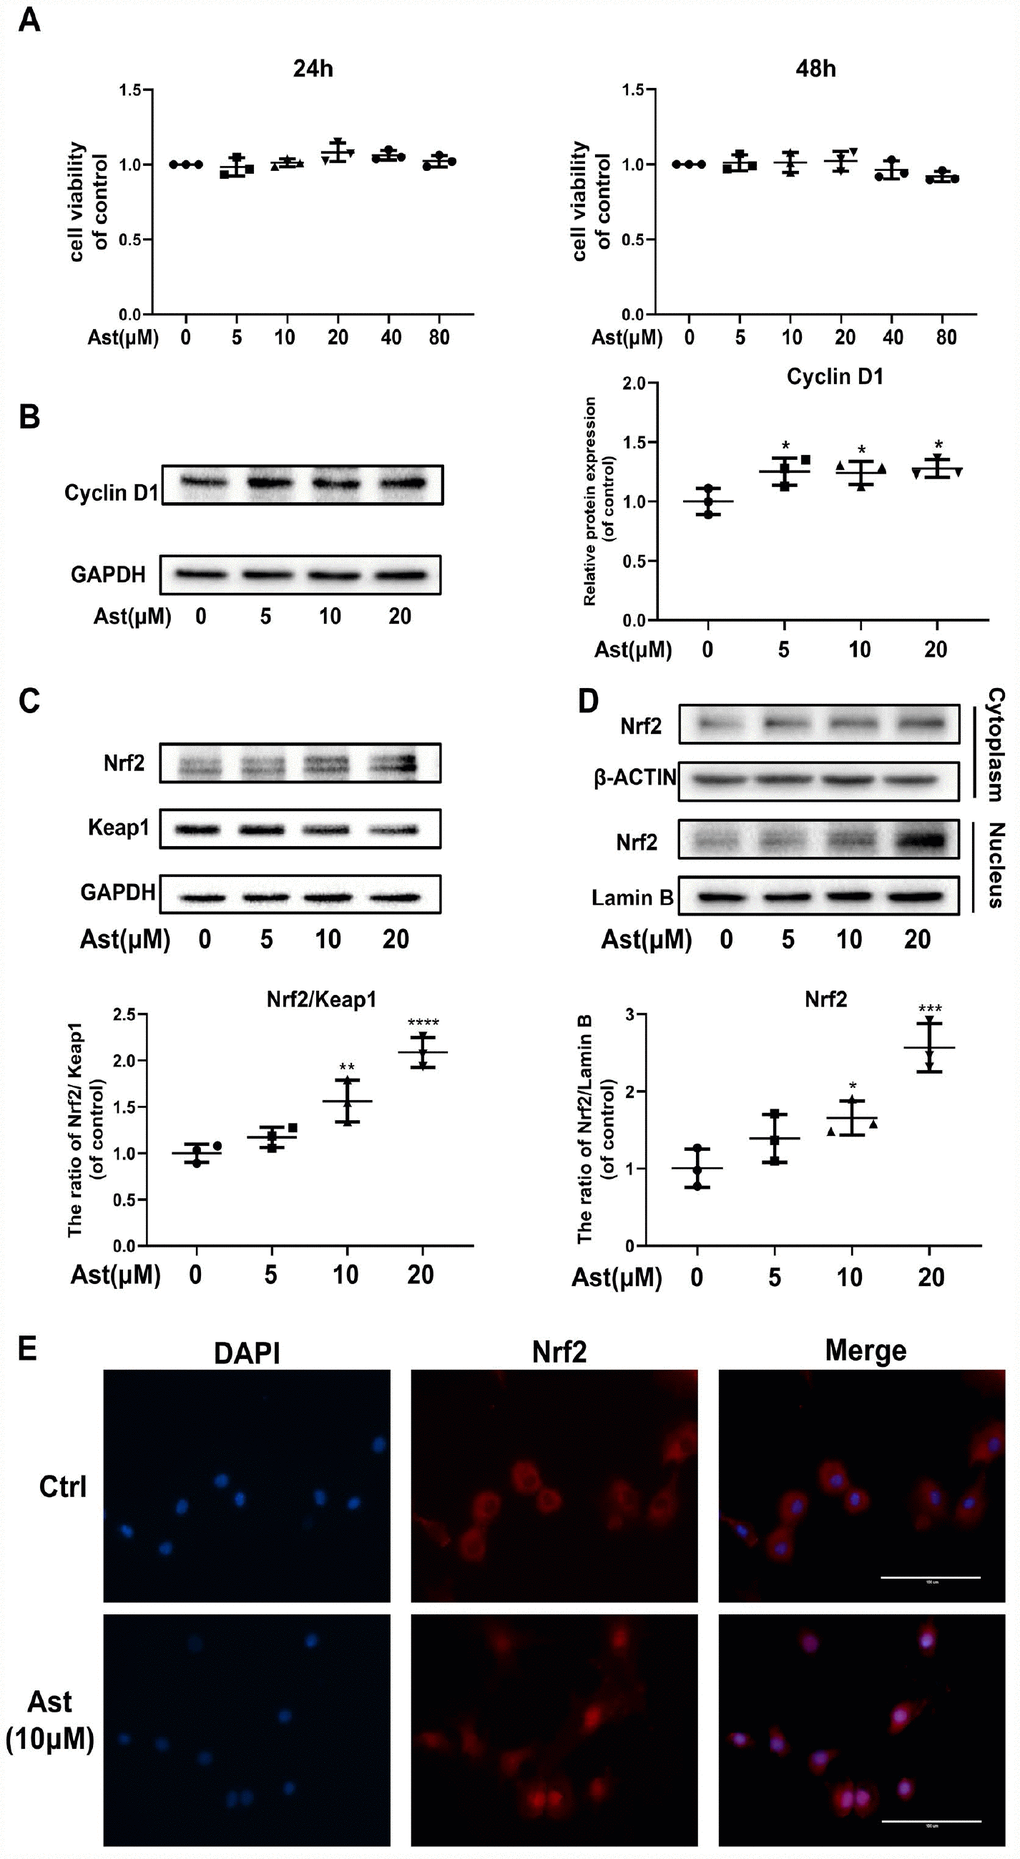 Ast did not affect cell viability and activated Nrf2 in mouse chondrocytes. (A) The cytotoxic effect of Ast (5, 10, 20, 40, and 80 μM) exposure for 24 and 48 h on chondrocytes was determined using a CCK8 assay. (B, C) Chondrocytes were treated with Ast (5, 10, and 20 μM) for 24 h. Expression levels of Cyclin D1, Nrf2, and Keap1 were determined by western blotting and quantified. (D, E) Nuclear translocation of Nrf2 was detected by western blotting and immunofluorescence after treatment of chondrocytes with Ast (10 μM) for 24 h, and the band density of Nrf2 in nucleus was quantified. The nuclear and cytoplasmic fractions used in the western blotting were obtained using a nuclear and cytoplasmic protein extraction kit (P0027, Beyotime, China). The data are presented as dot plots from three independent experiments. Significant differences among different groups are indicated as *p 